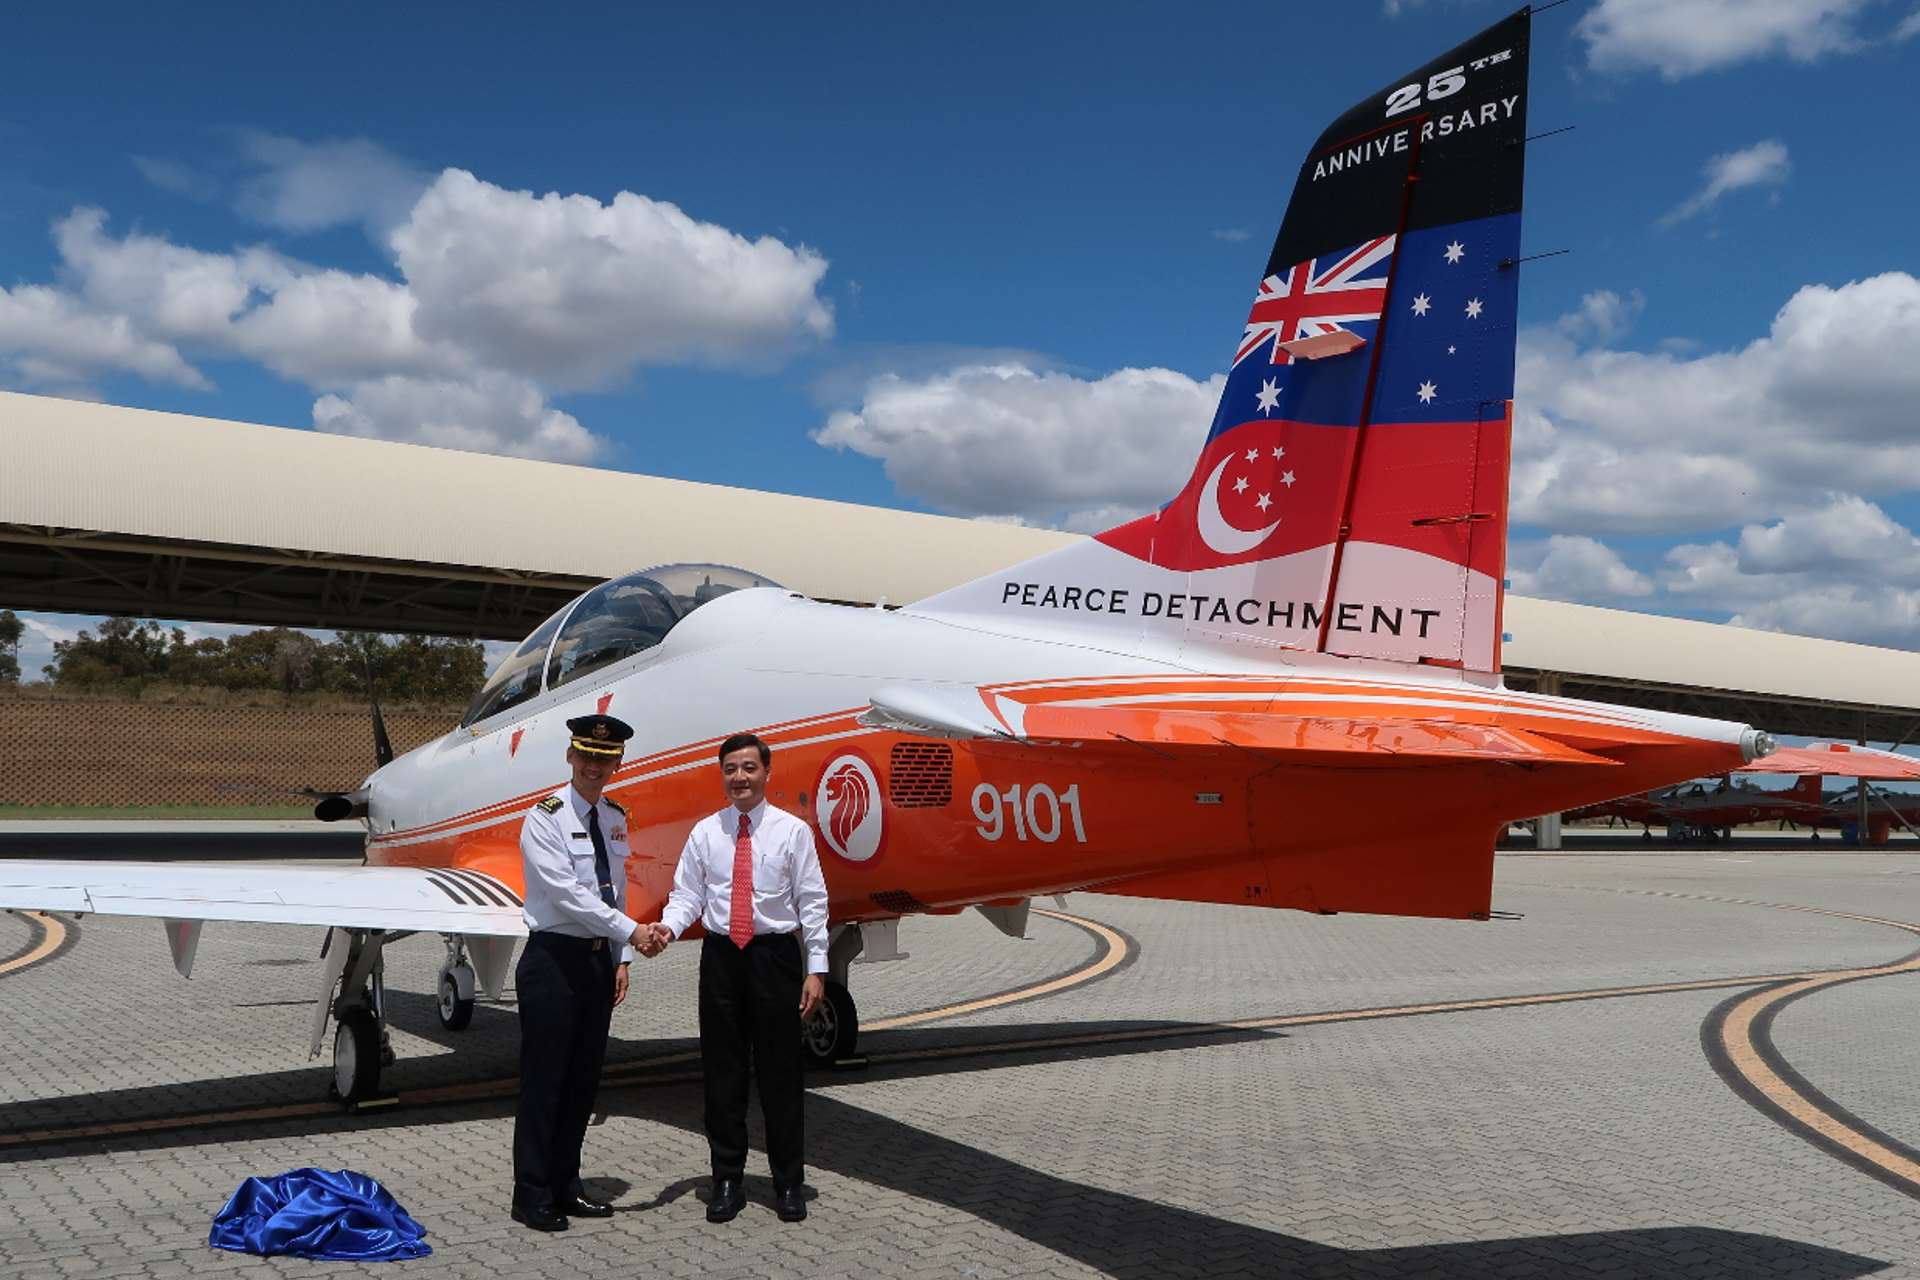 Mr Heng Chee How with COL Kevin Goh after unveiling the commemorative PC-21 aircraft tail fin at the 25th anniversary commemorative event in Royal Australian Air Force Base Pearce, Australia.